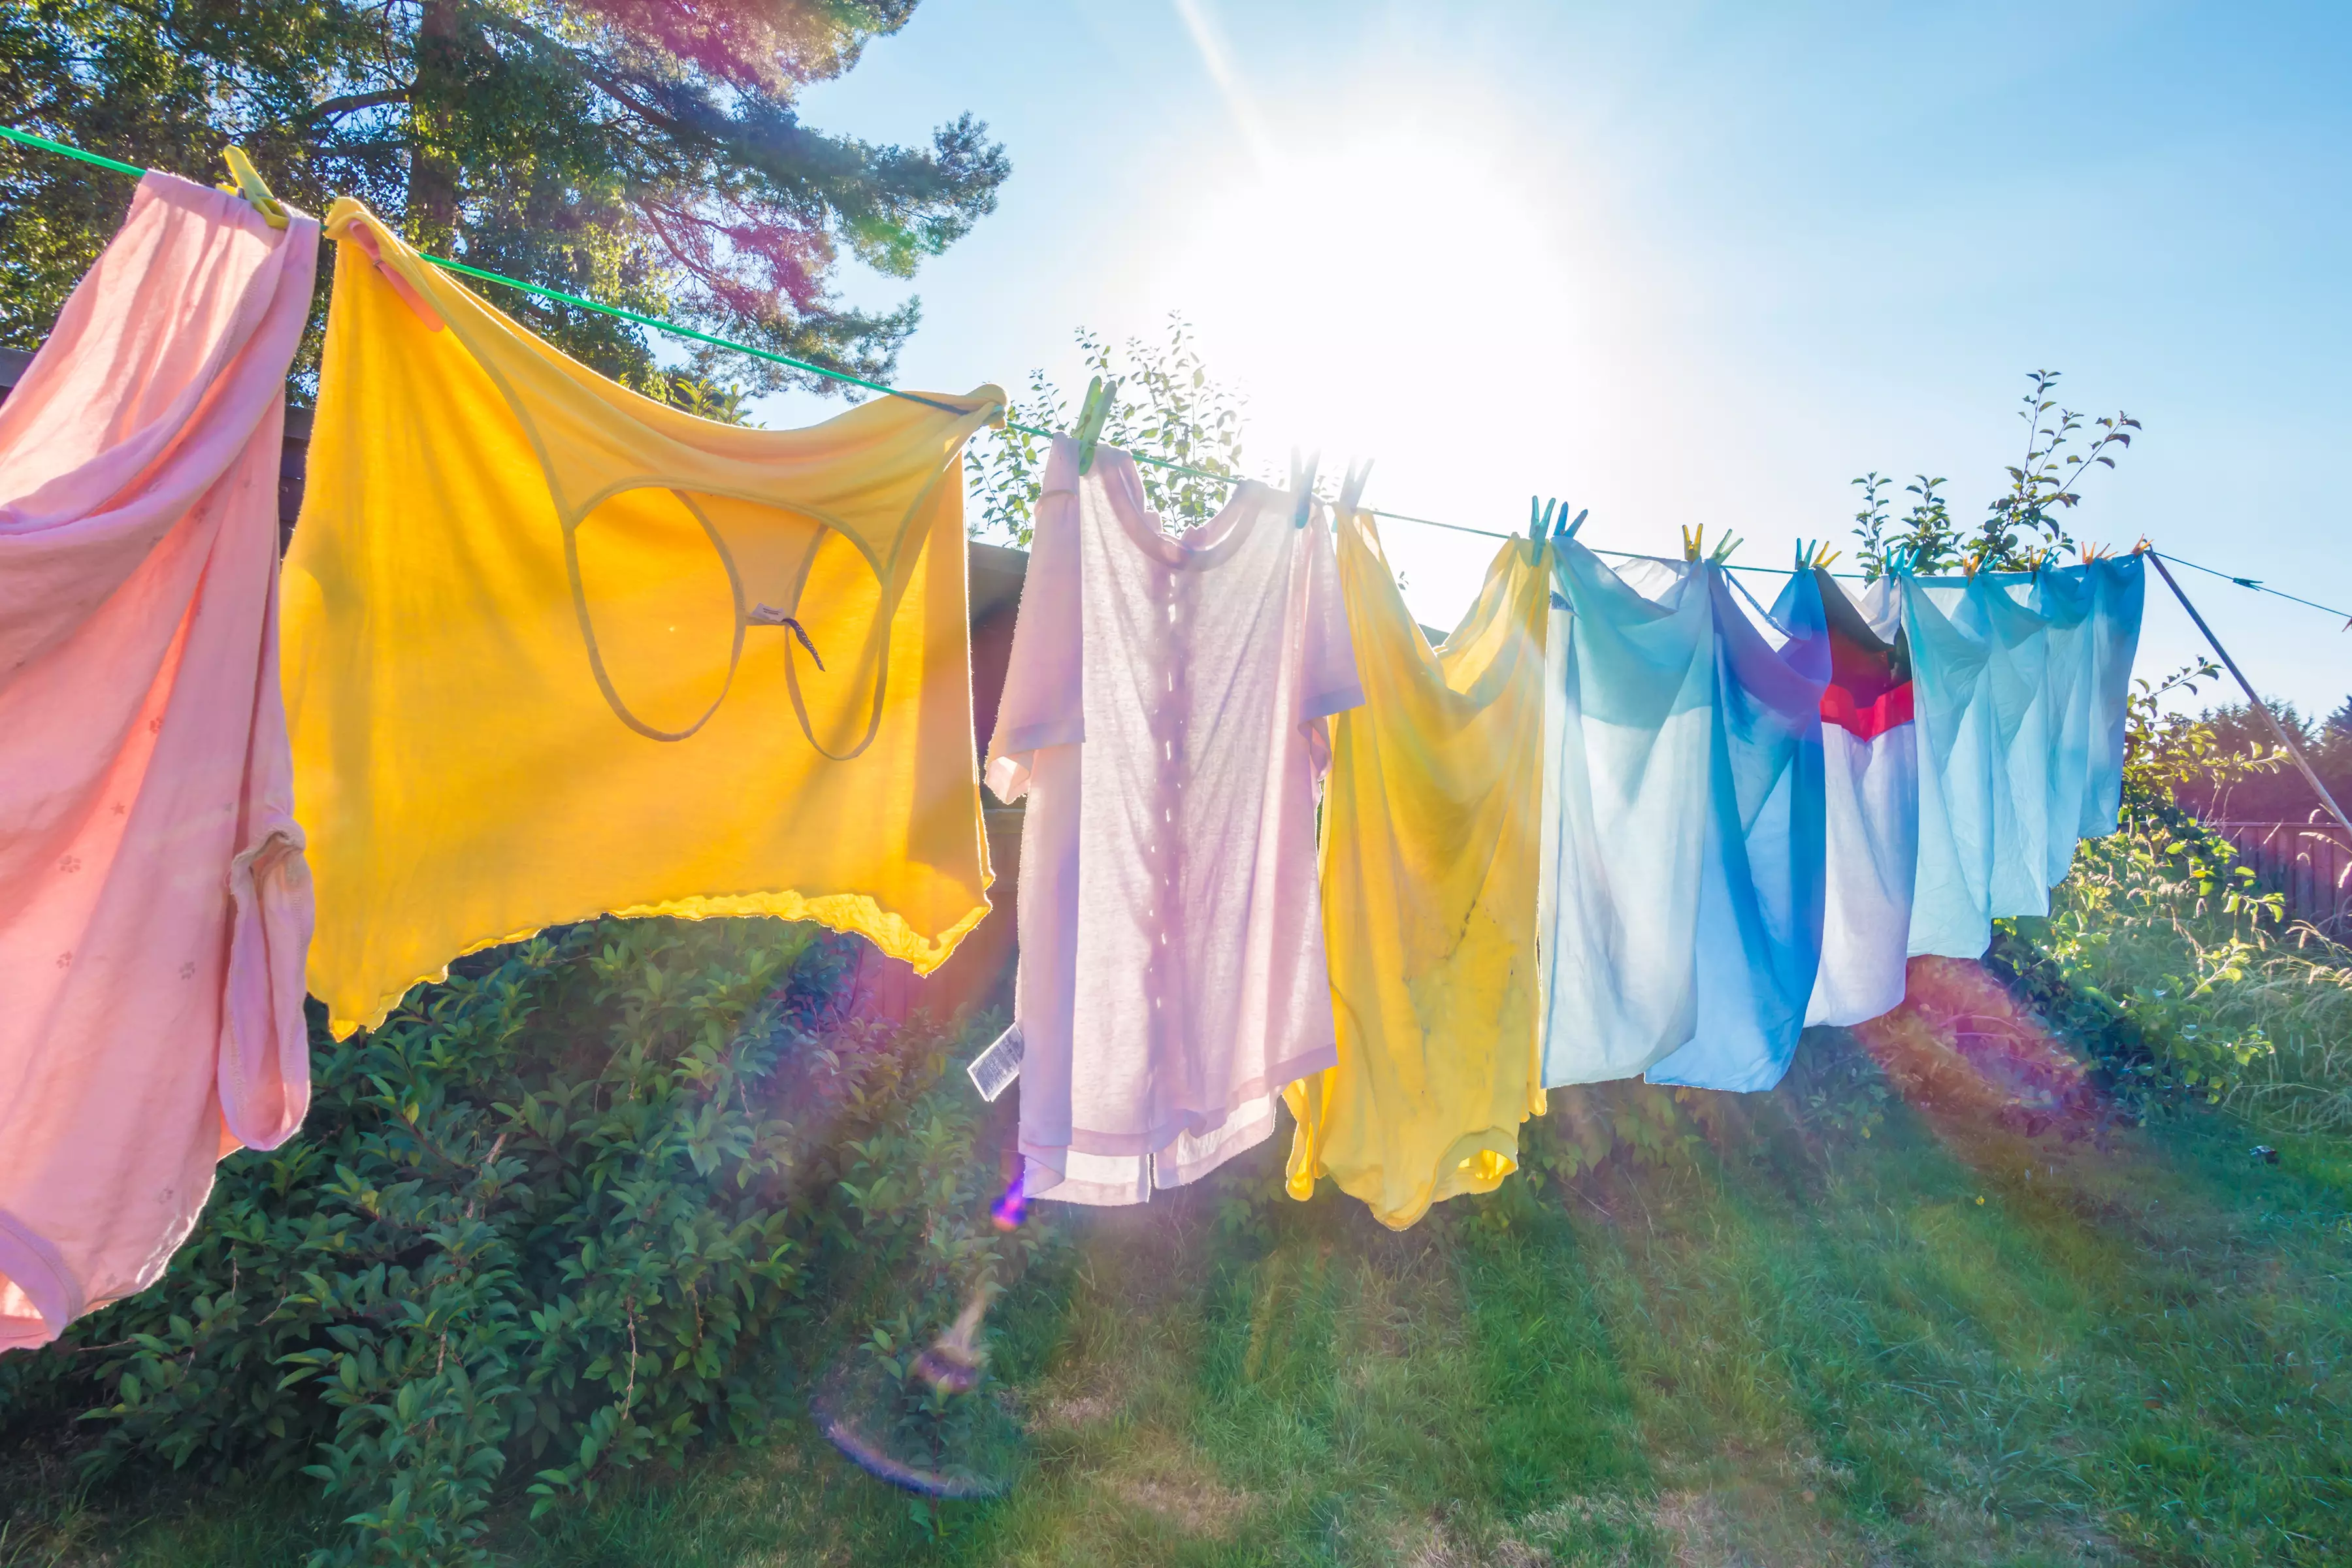 This alternative method of hanging up clothes takes up way more space (